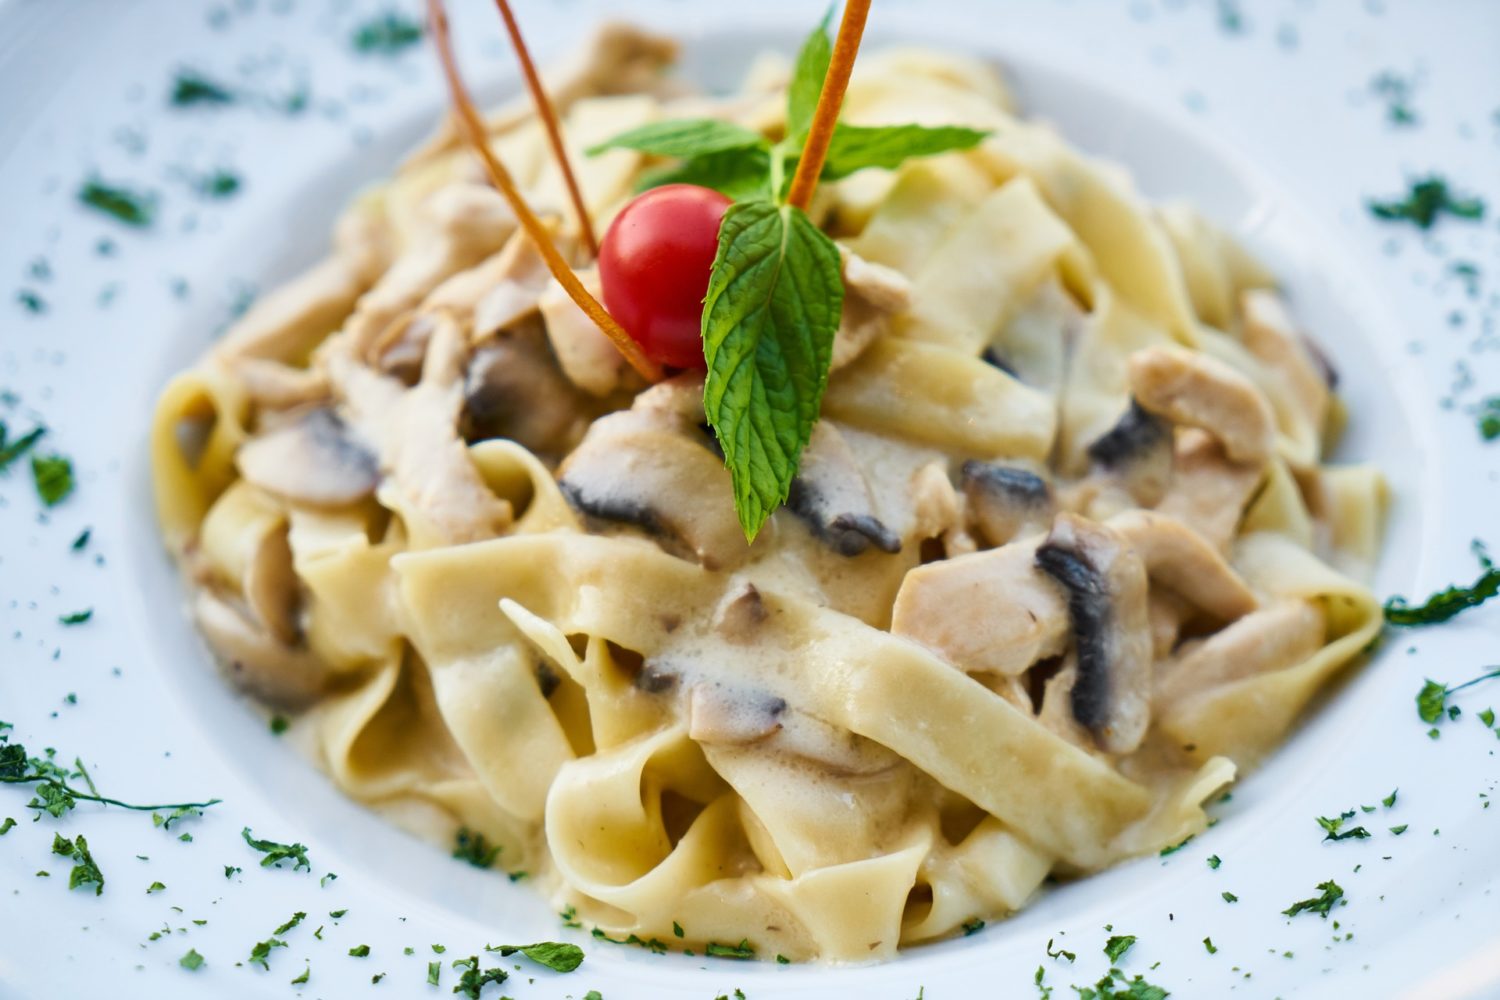 Delicious, fresh pasta found only in Italy!